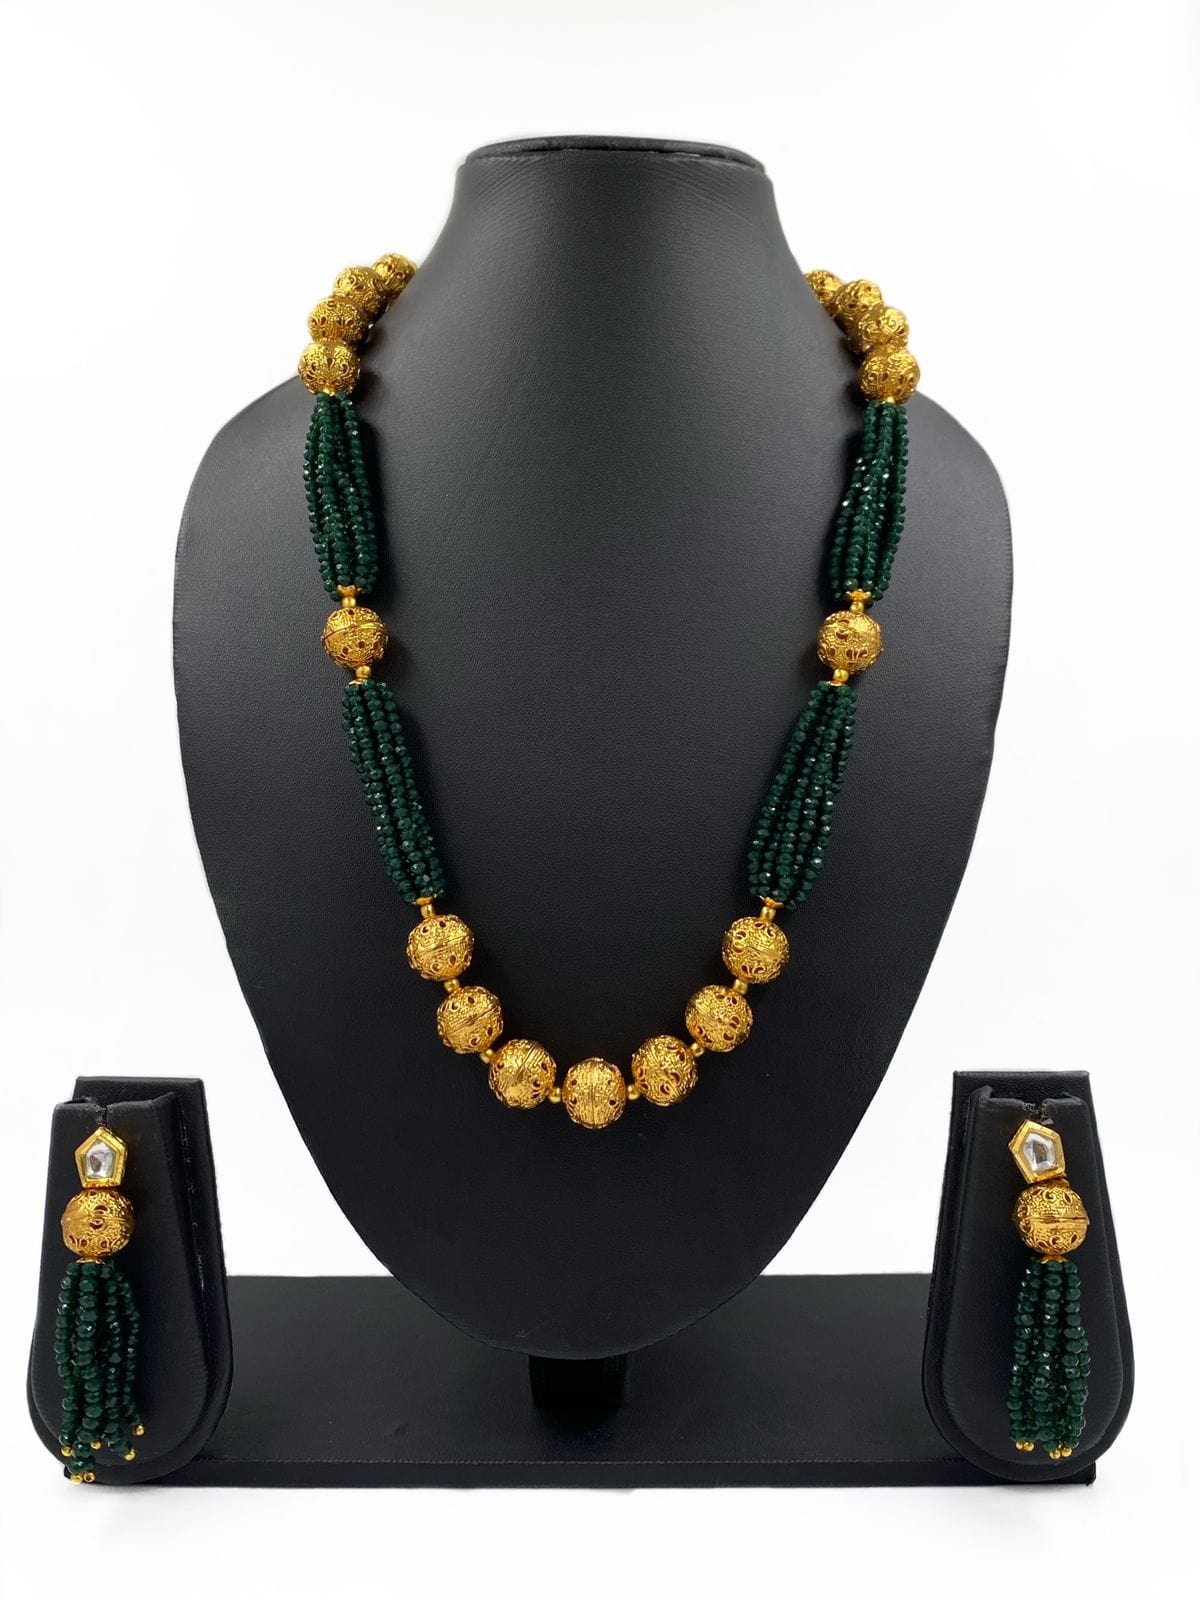 Designer Handcrafted Green Crystal And Golden Beads Necklace For Woman By Gehna Shop Beads Jewellery